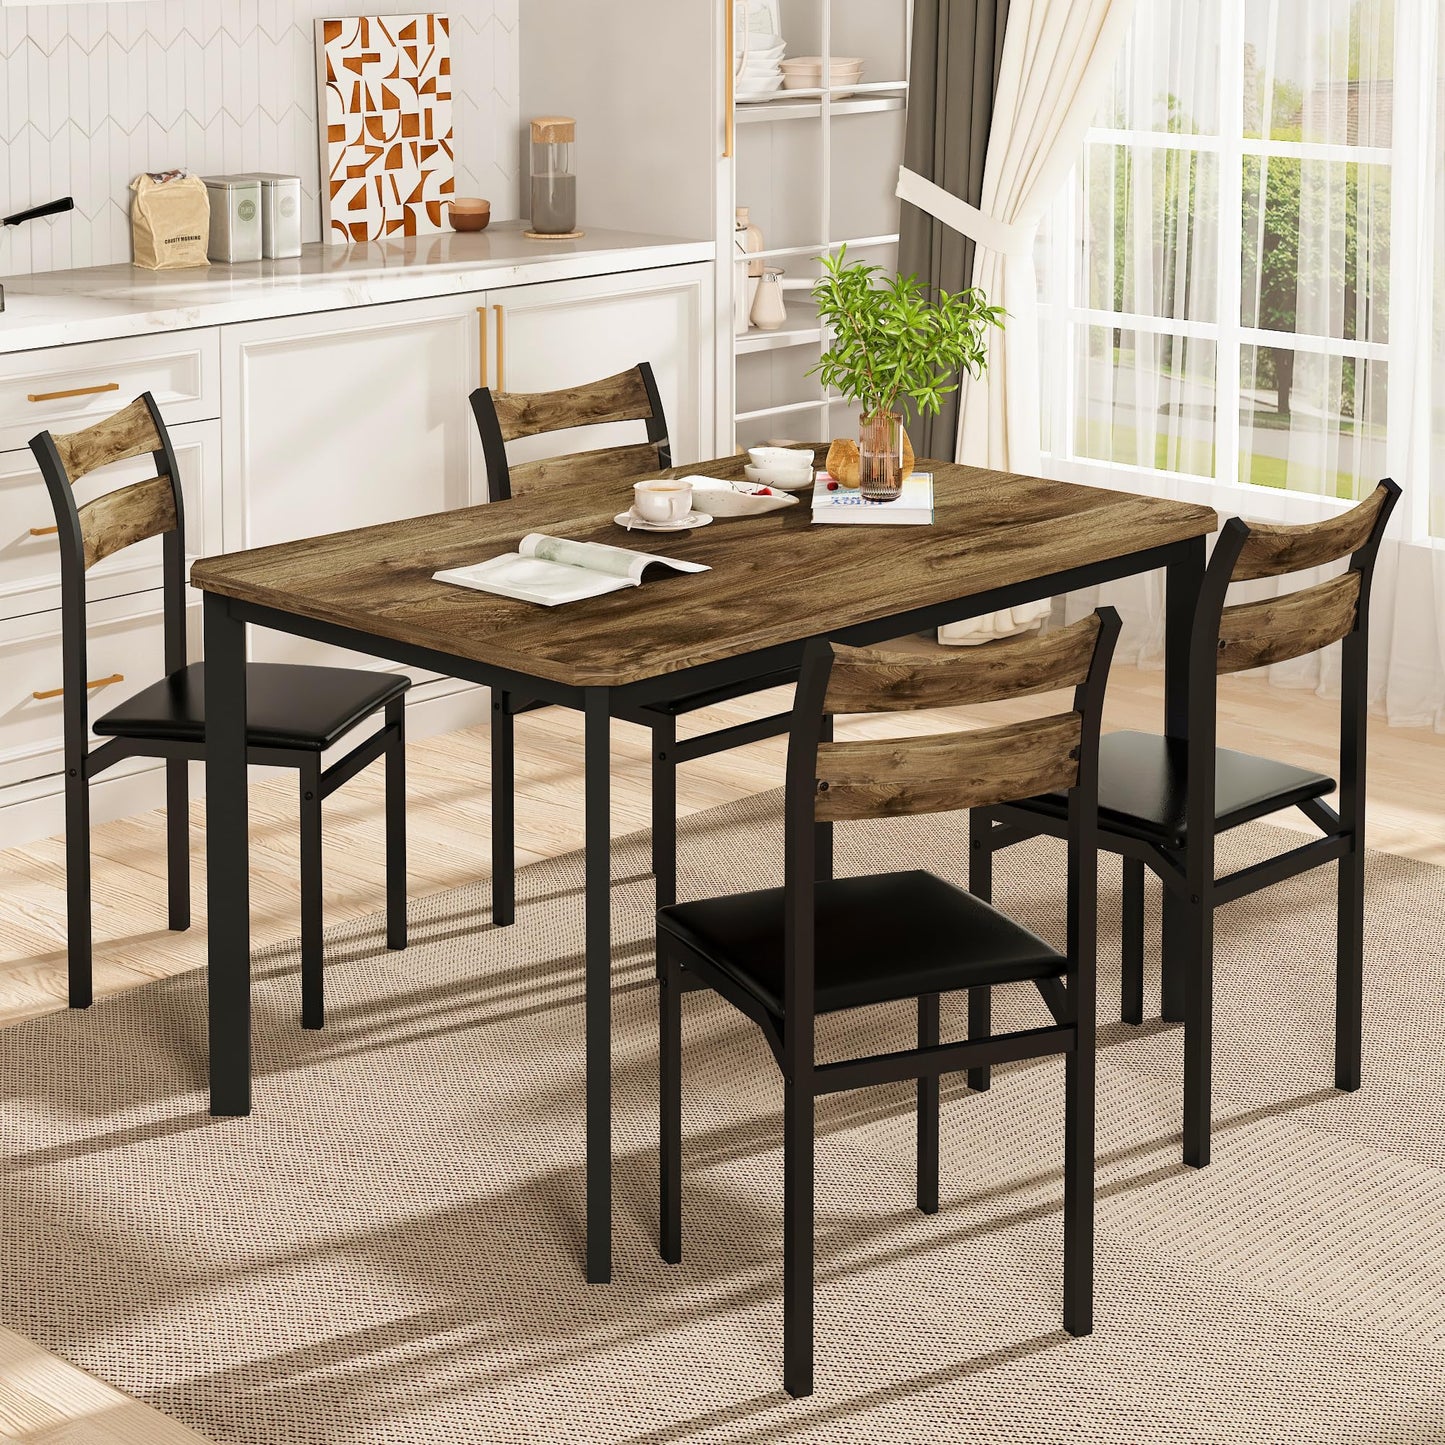 DKLGG Dining Table Set for 4, 43.3" Dining Room Table with 4 Upholstered PU Leather Chairs, Modern Wood Kitchen Table and Chairs Set, 5-Piece Dinette